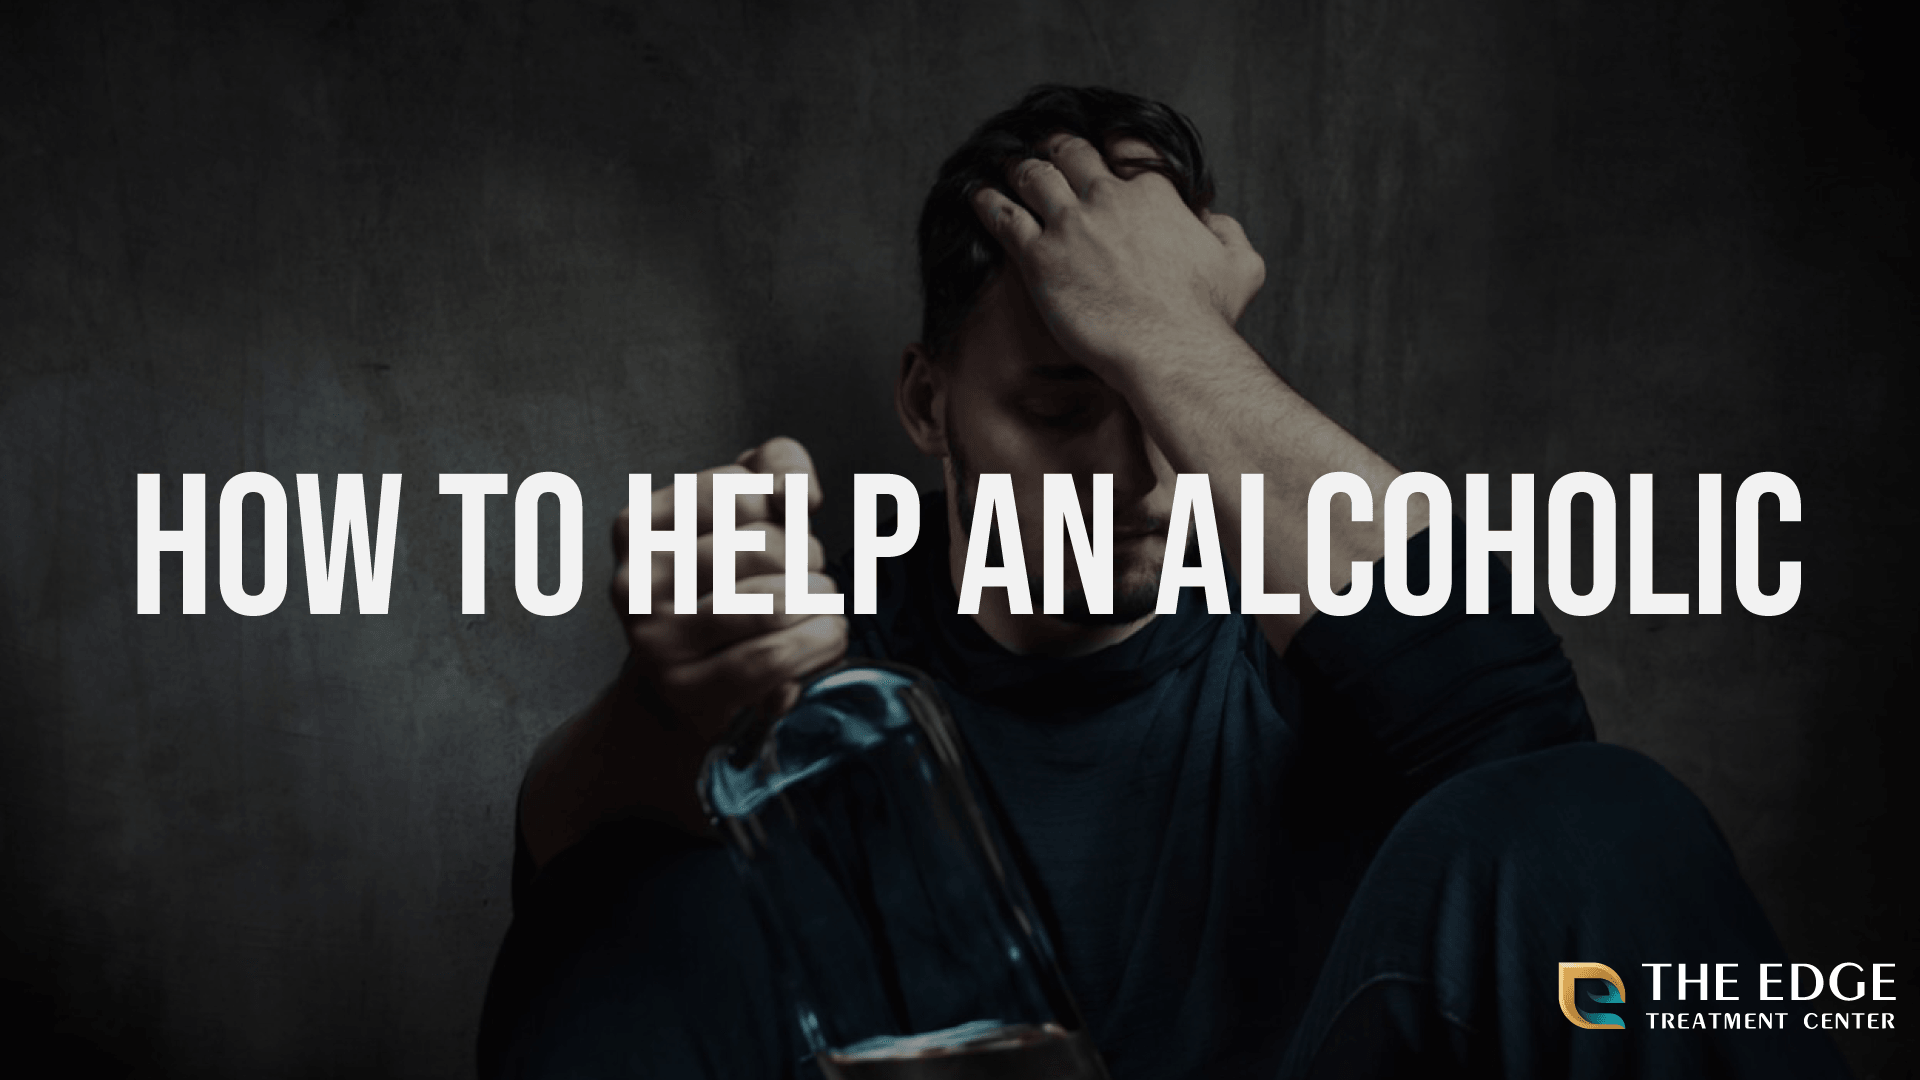 .How to Help an Alcoholic